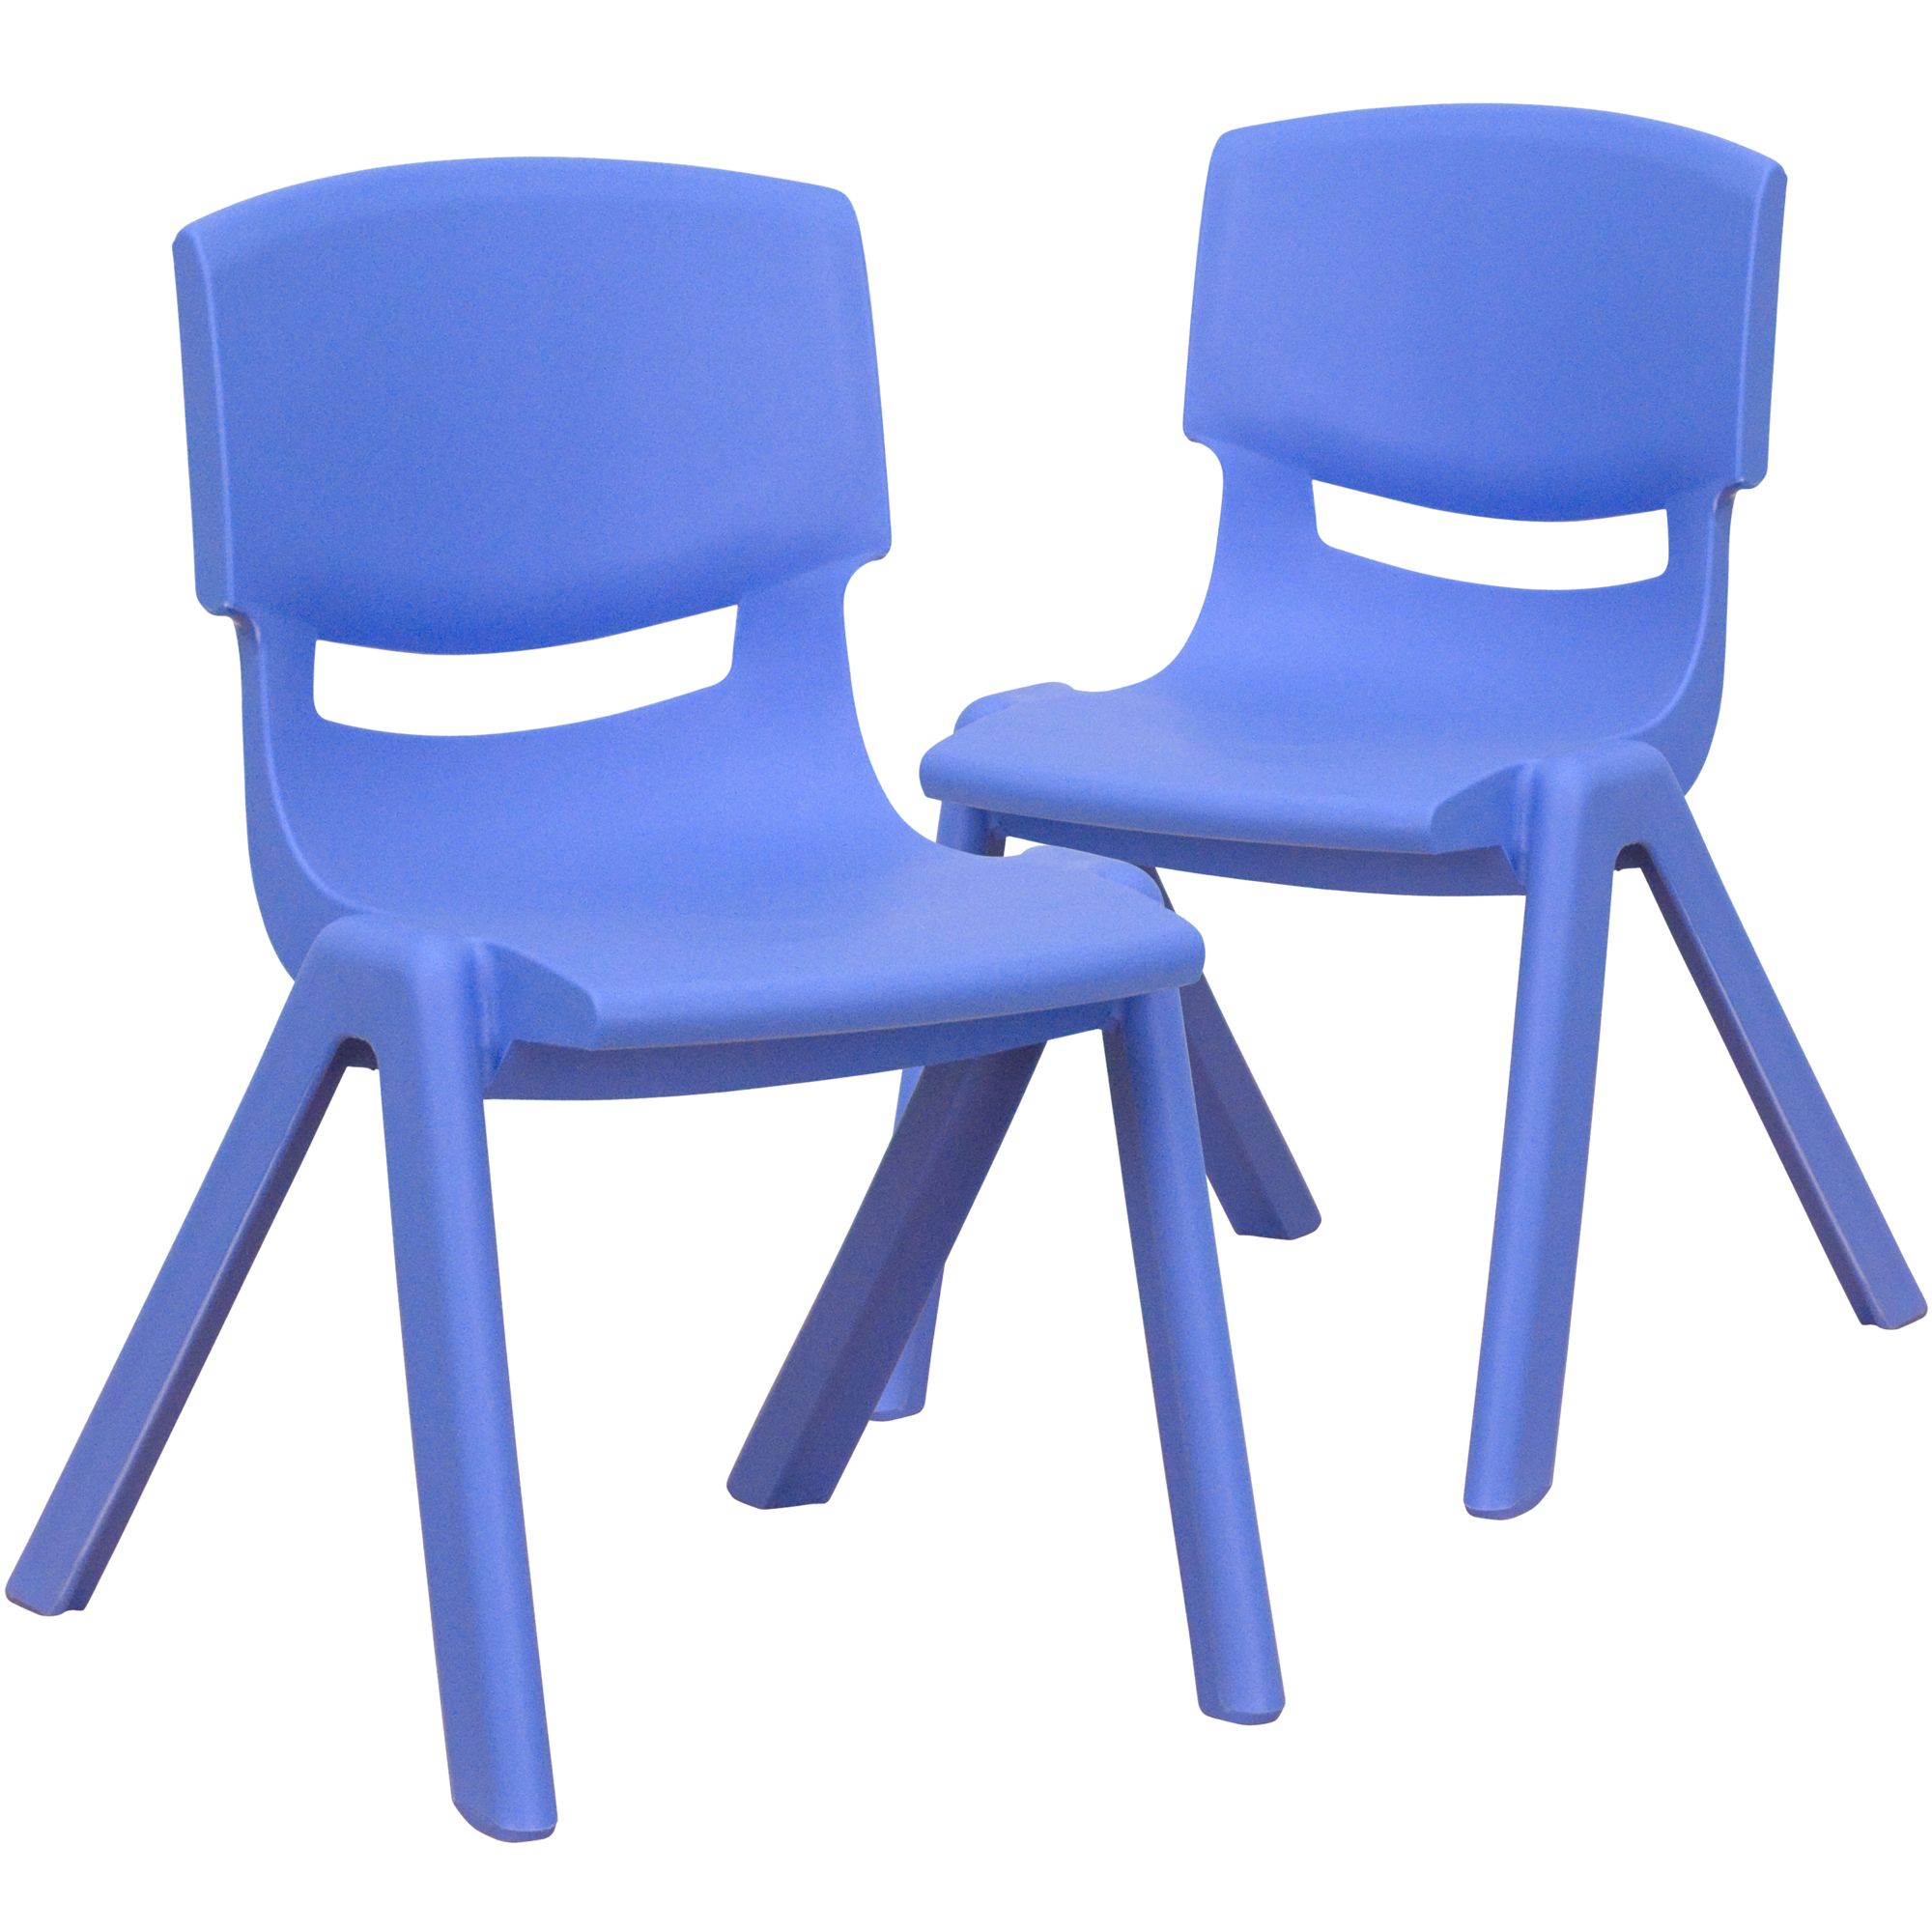 Flash Furniture, 2 Pack Blue Plastic Stack School Chair, 12Inch H Seat, Primary Color Blue, Included (qty.) 2, Model 2YUYCX002BLUE